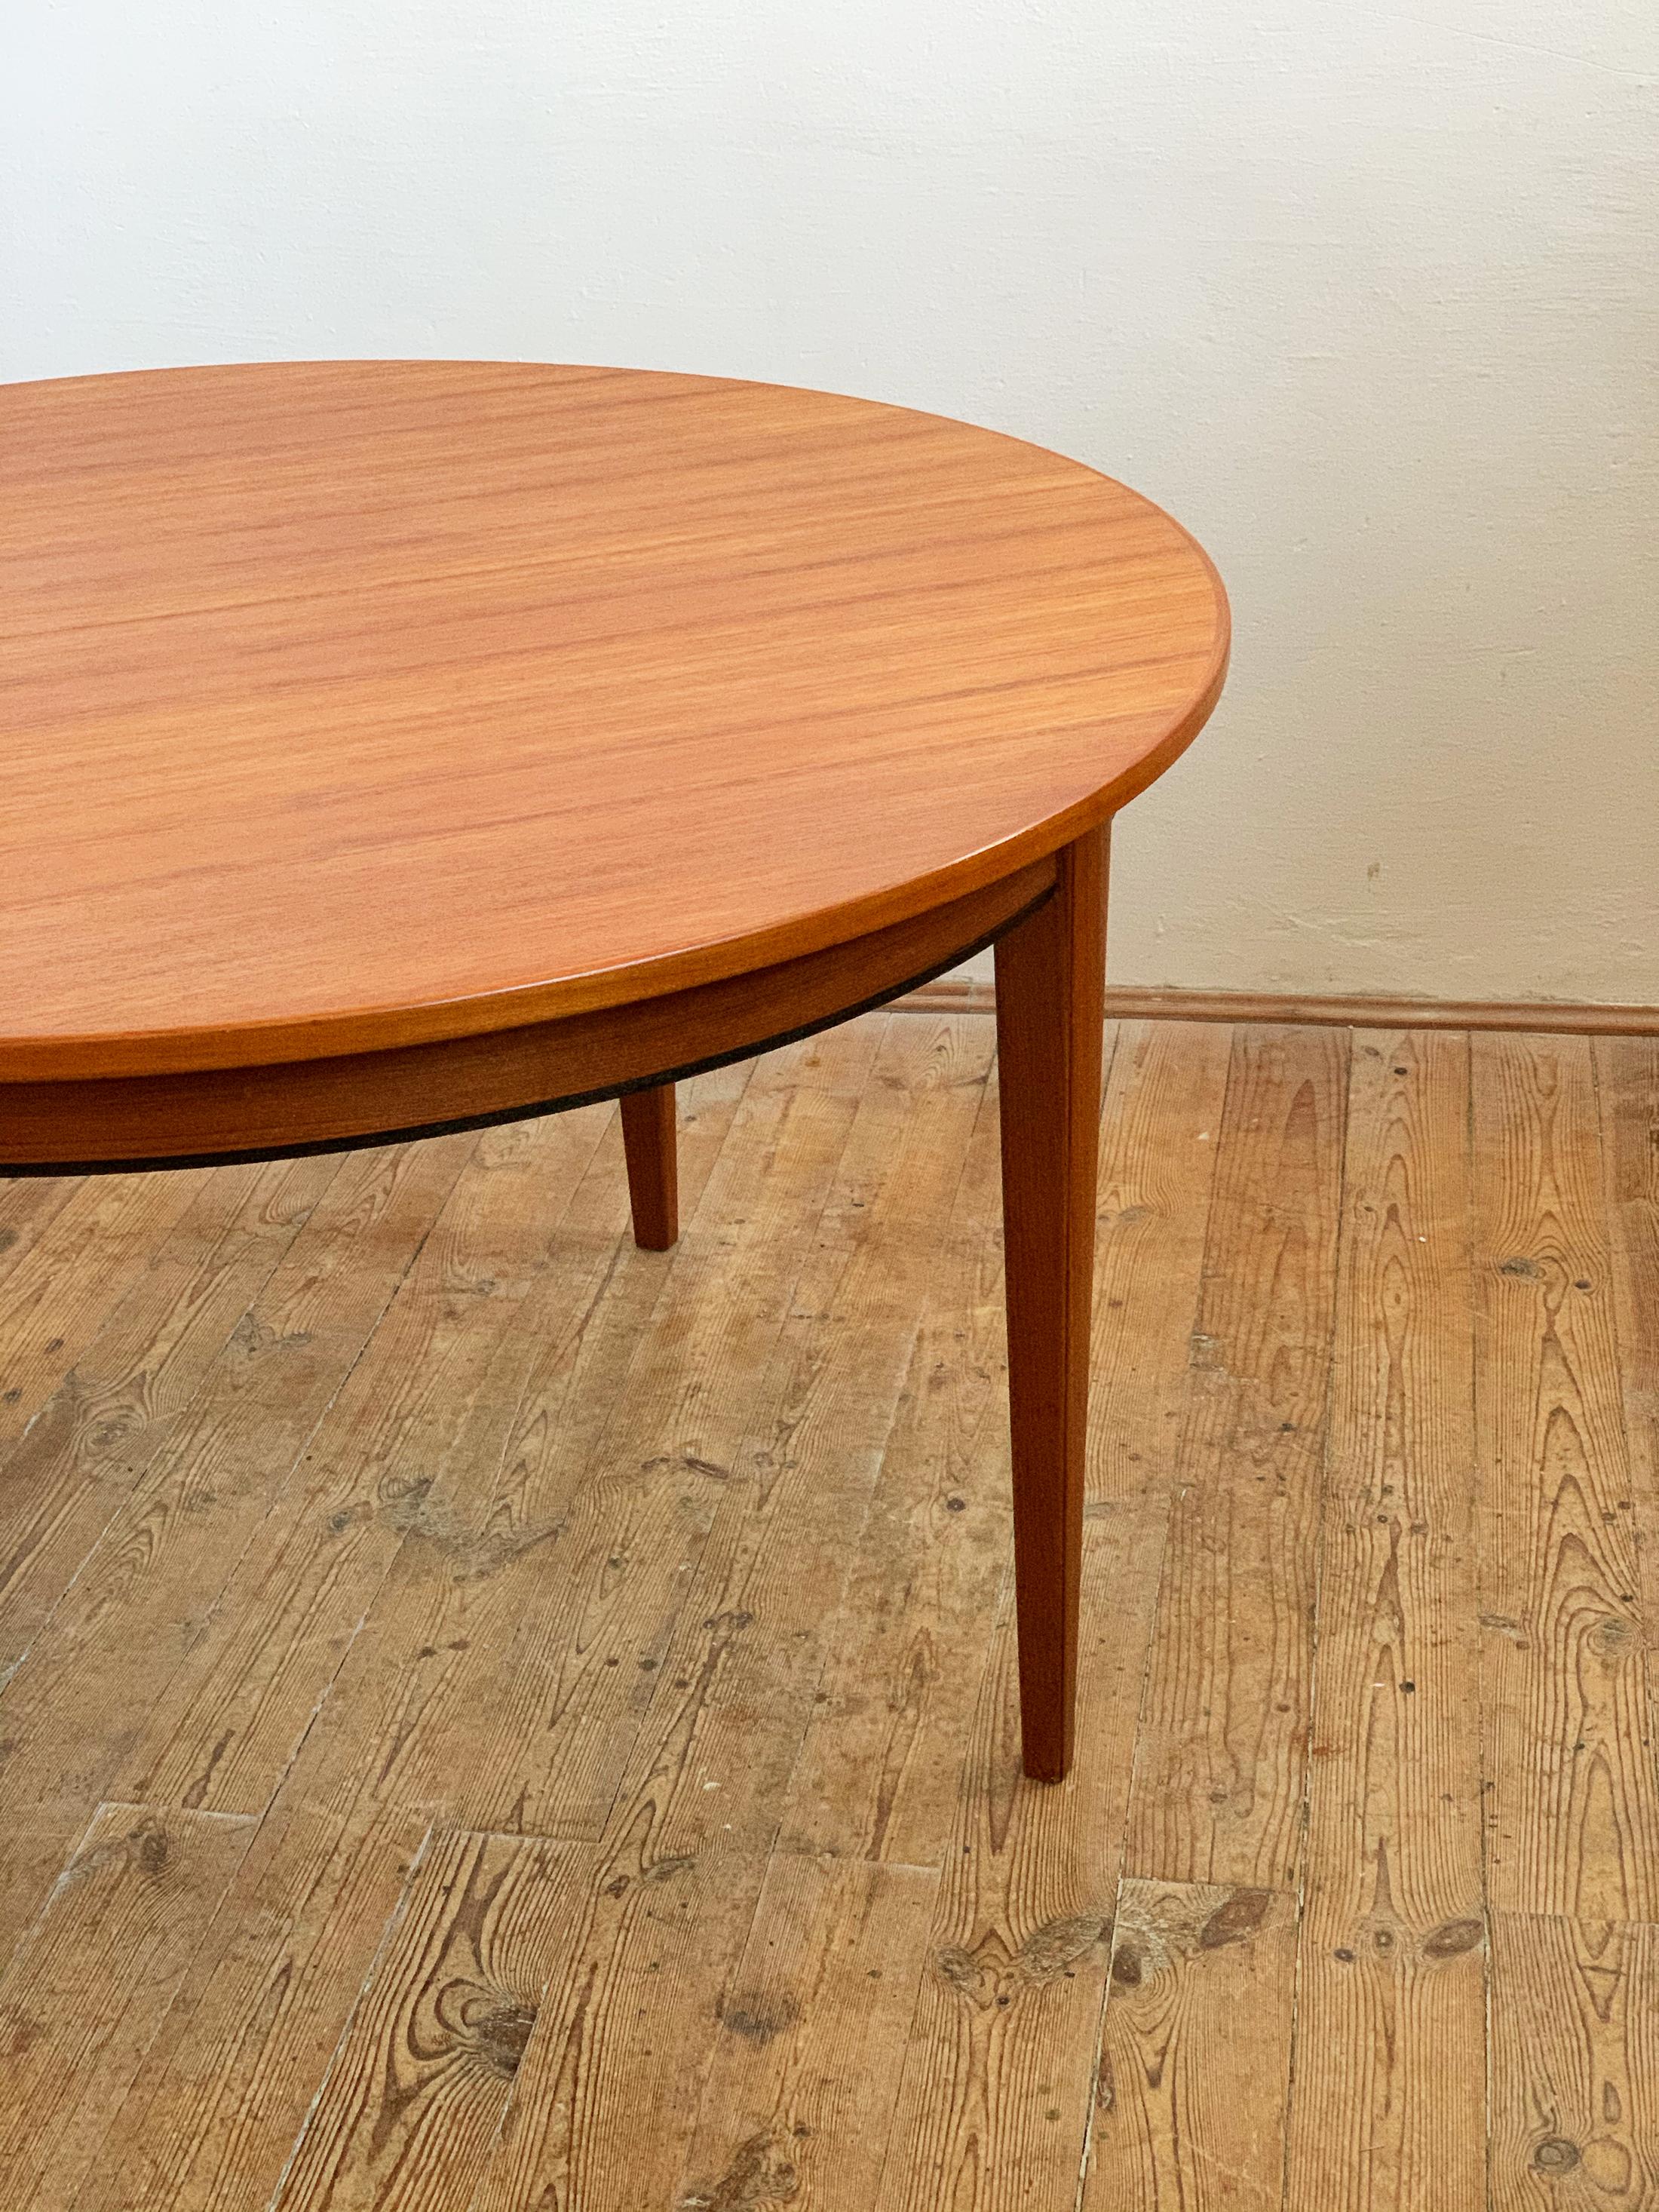 Round Danish Mid-Century Modern Extendable Teak Dining Table Made by Omann Jun For Sale 5